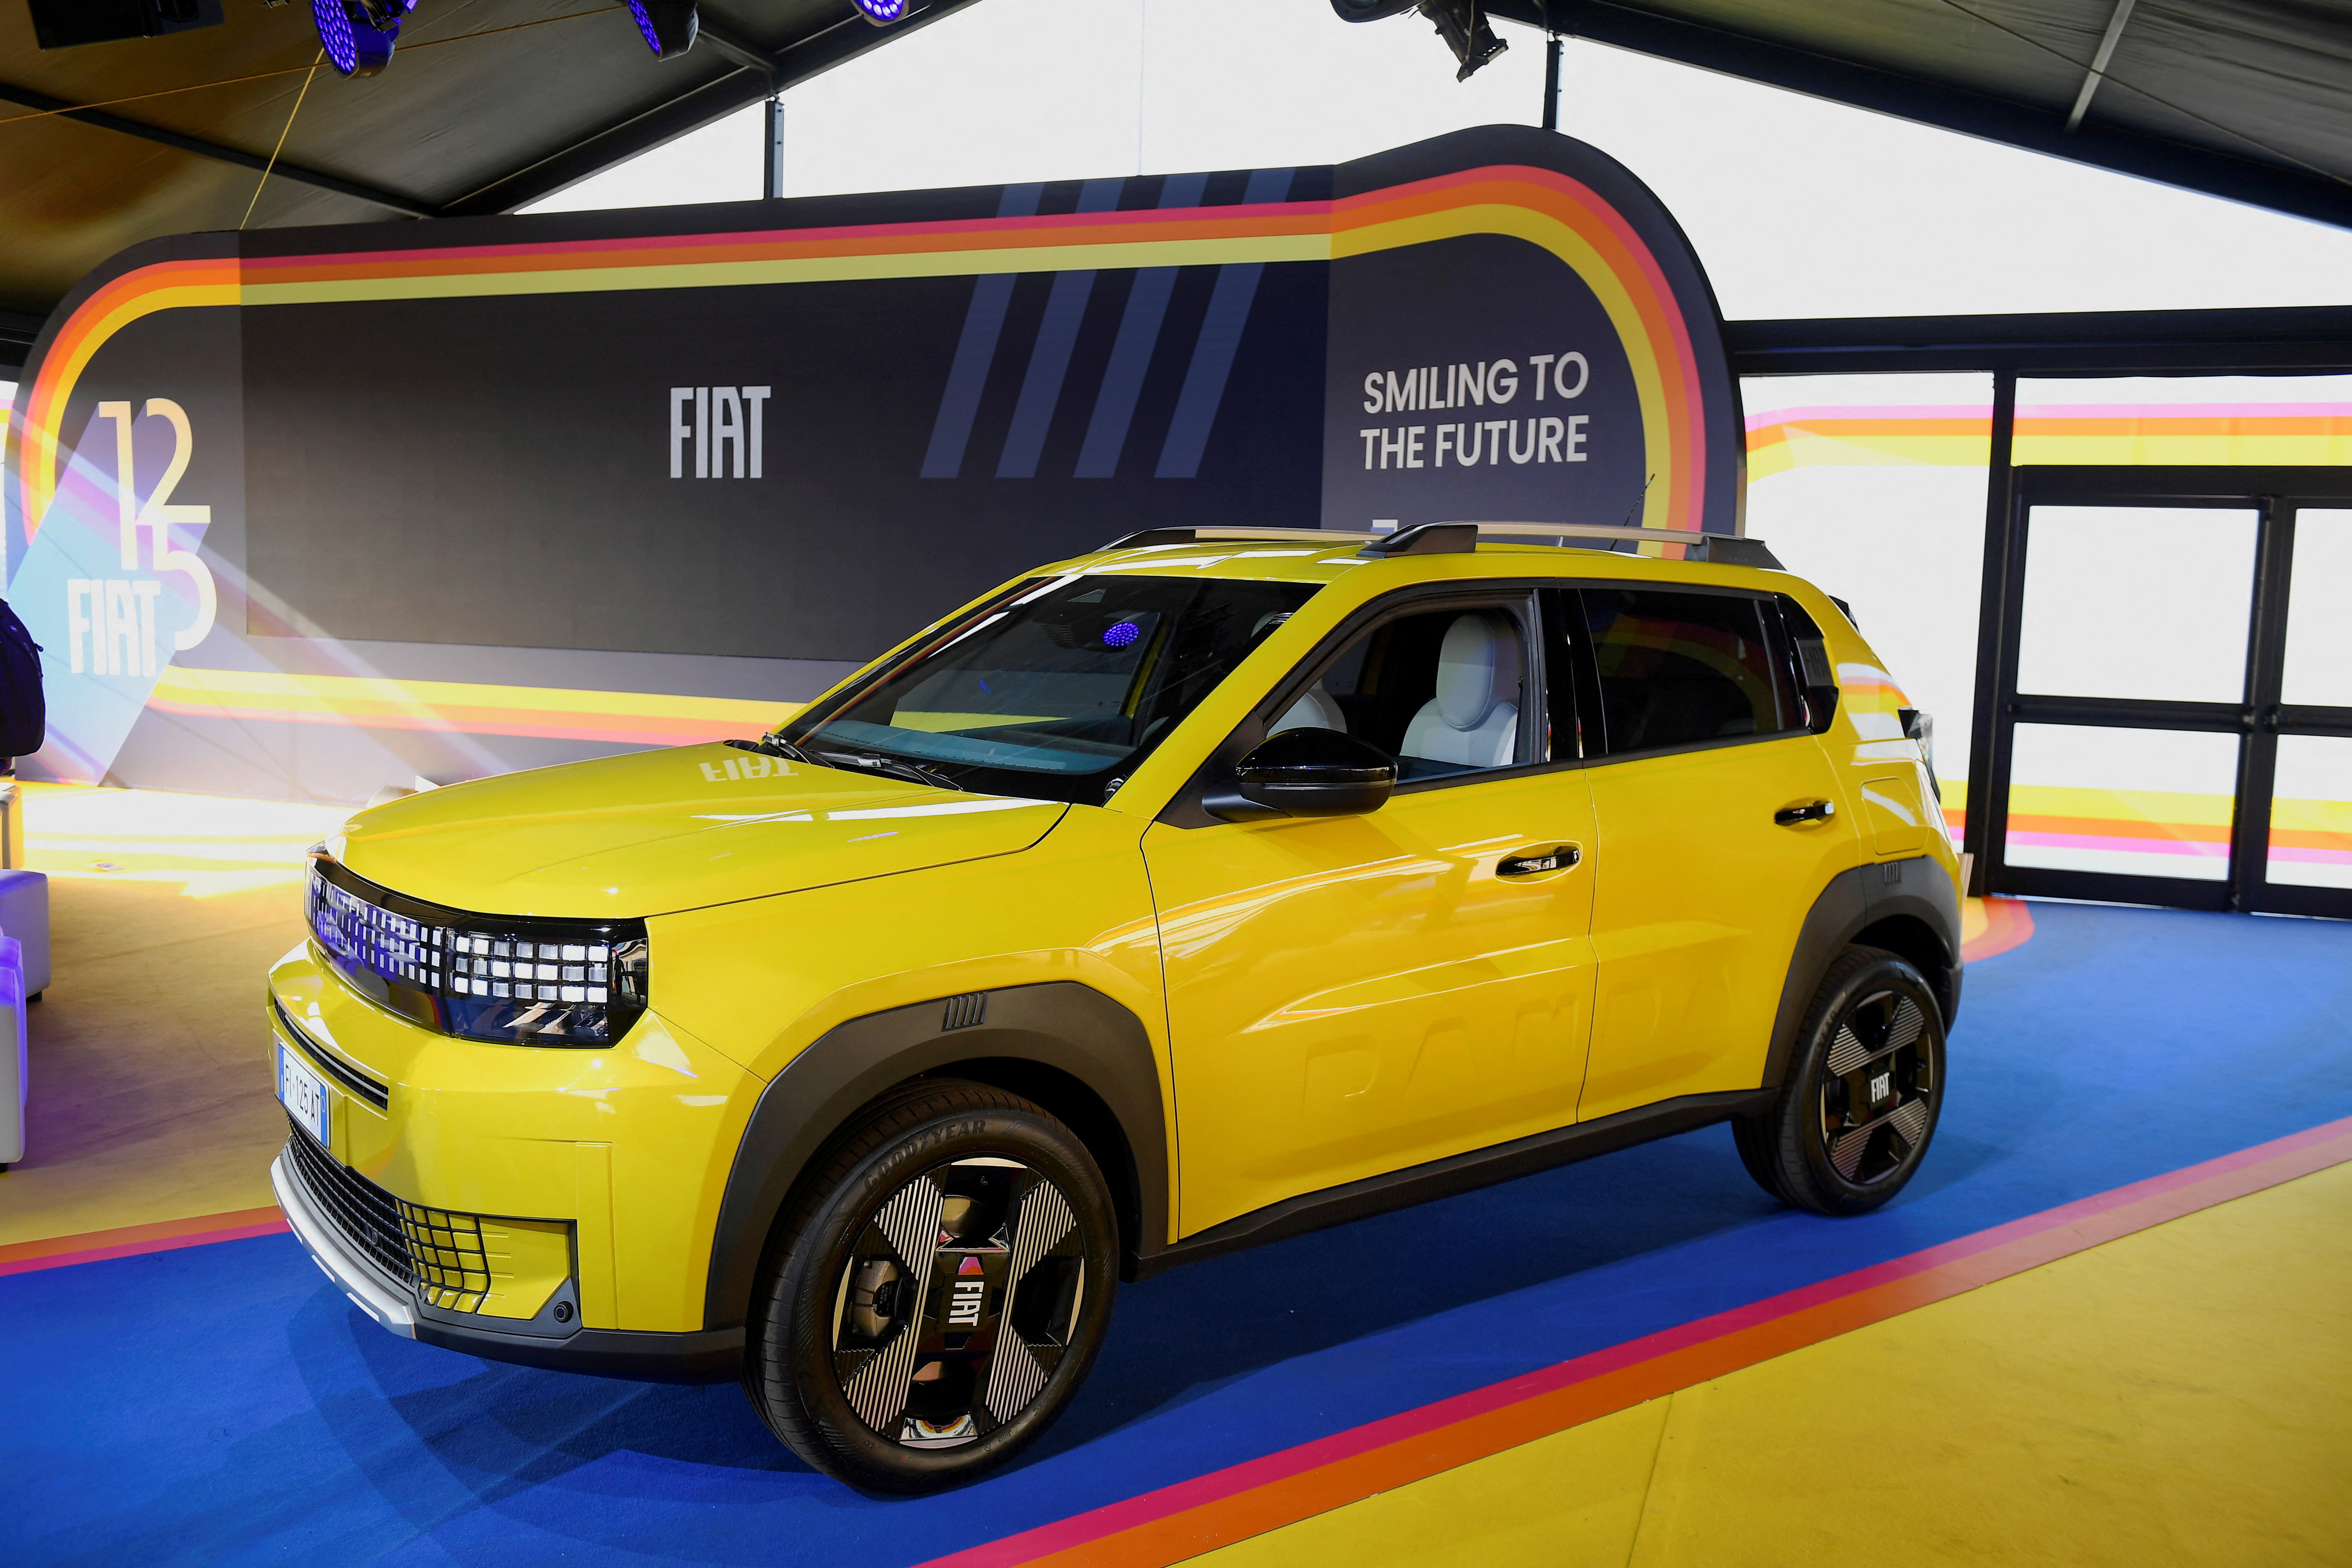 Fiat unveils its new Panda car during the celebration of its 125th anniversary, in Turin